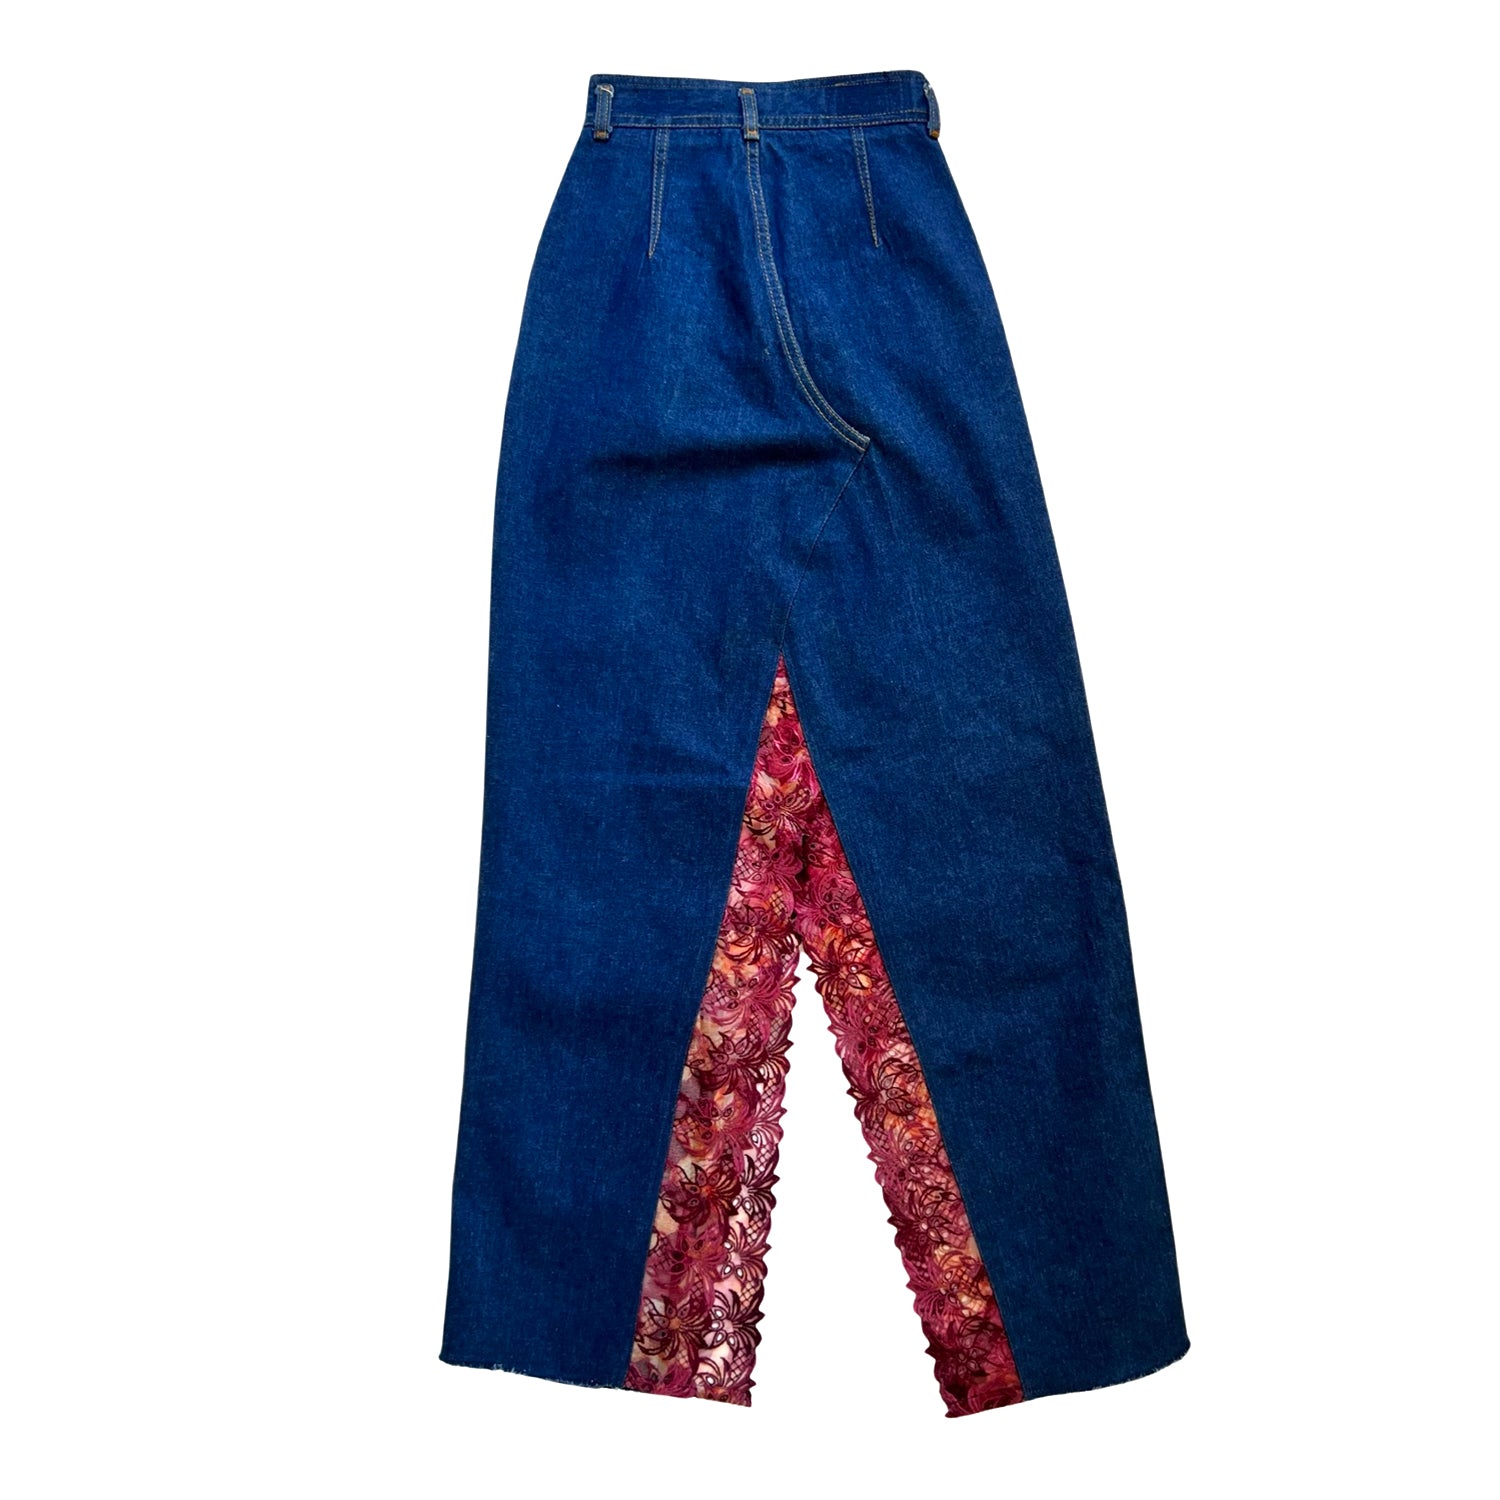 Upcycled Skirt in Blue Denim & Burgundy Lace